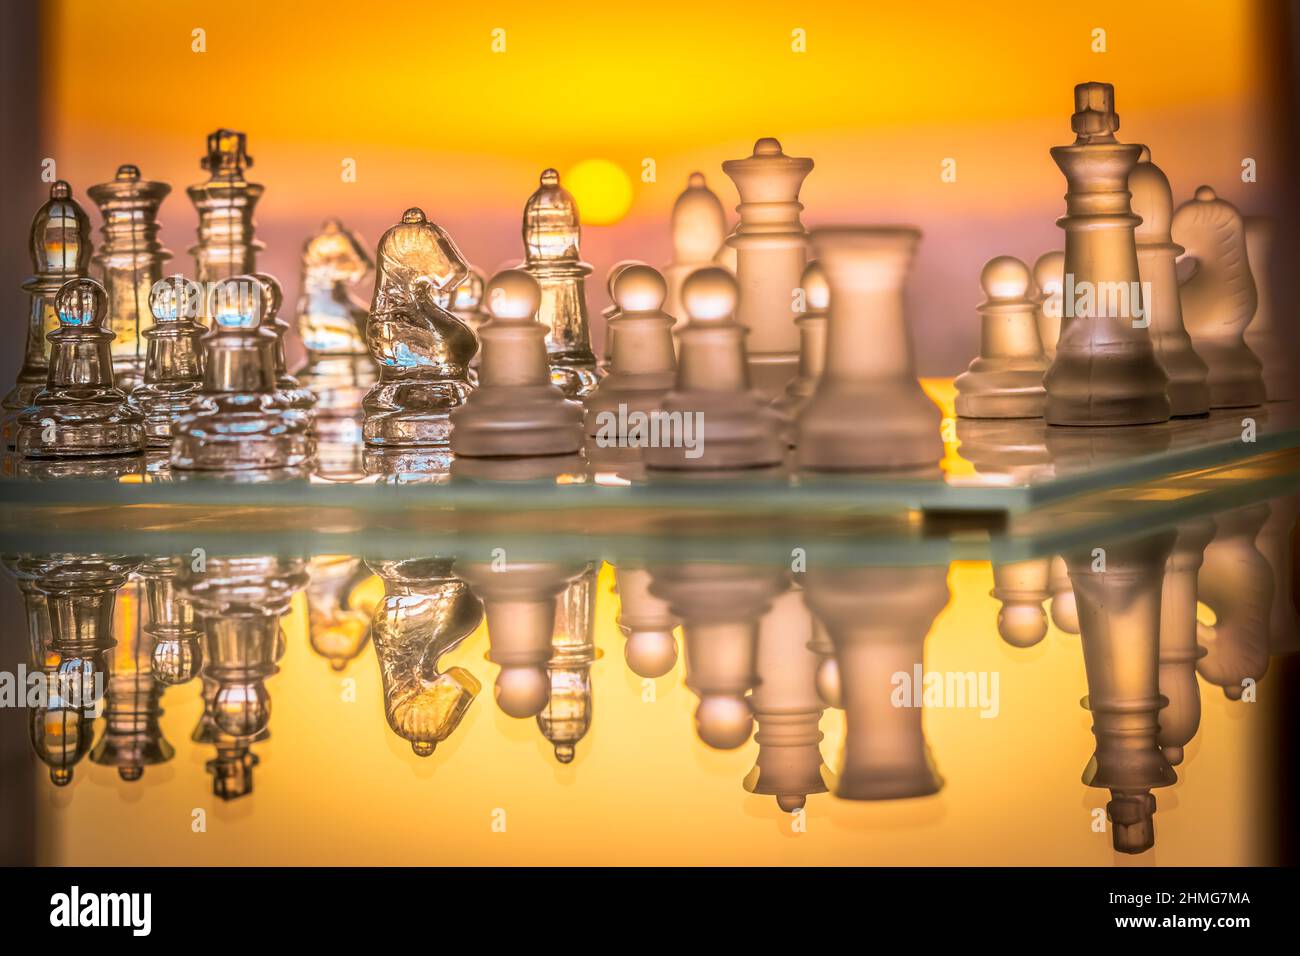 Chess set with glass material pieces and chessboard horizontal reflected with a saturated orange colored sunset in the background. Stock Photo